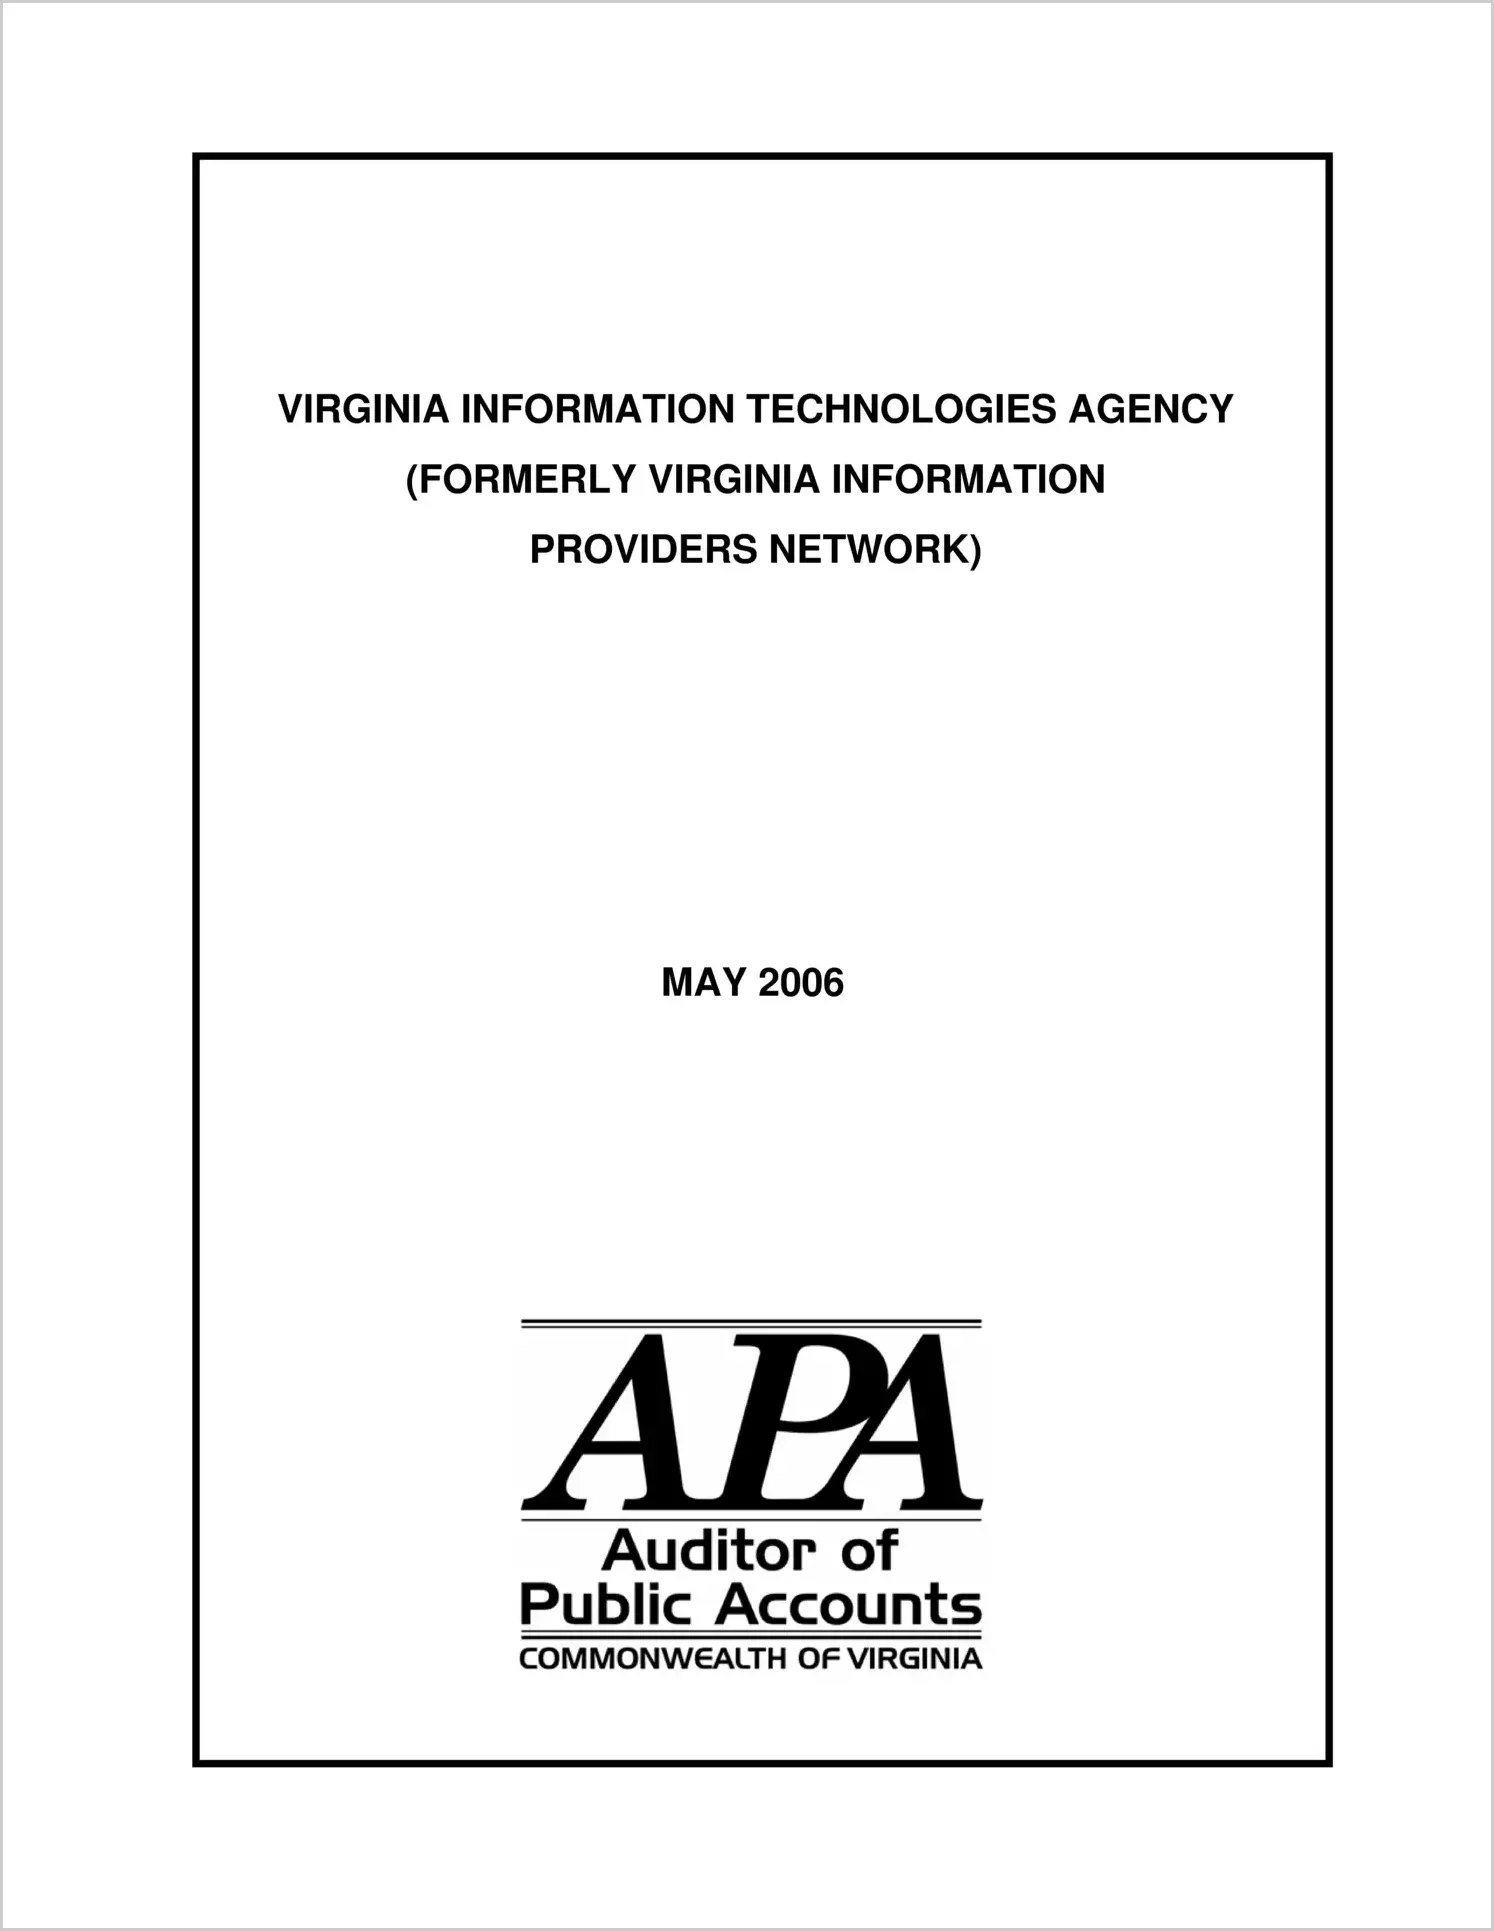 Virginia Information Technologies Agency (Formerly Virginia Information Providers Network) as of May 1, 2006